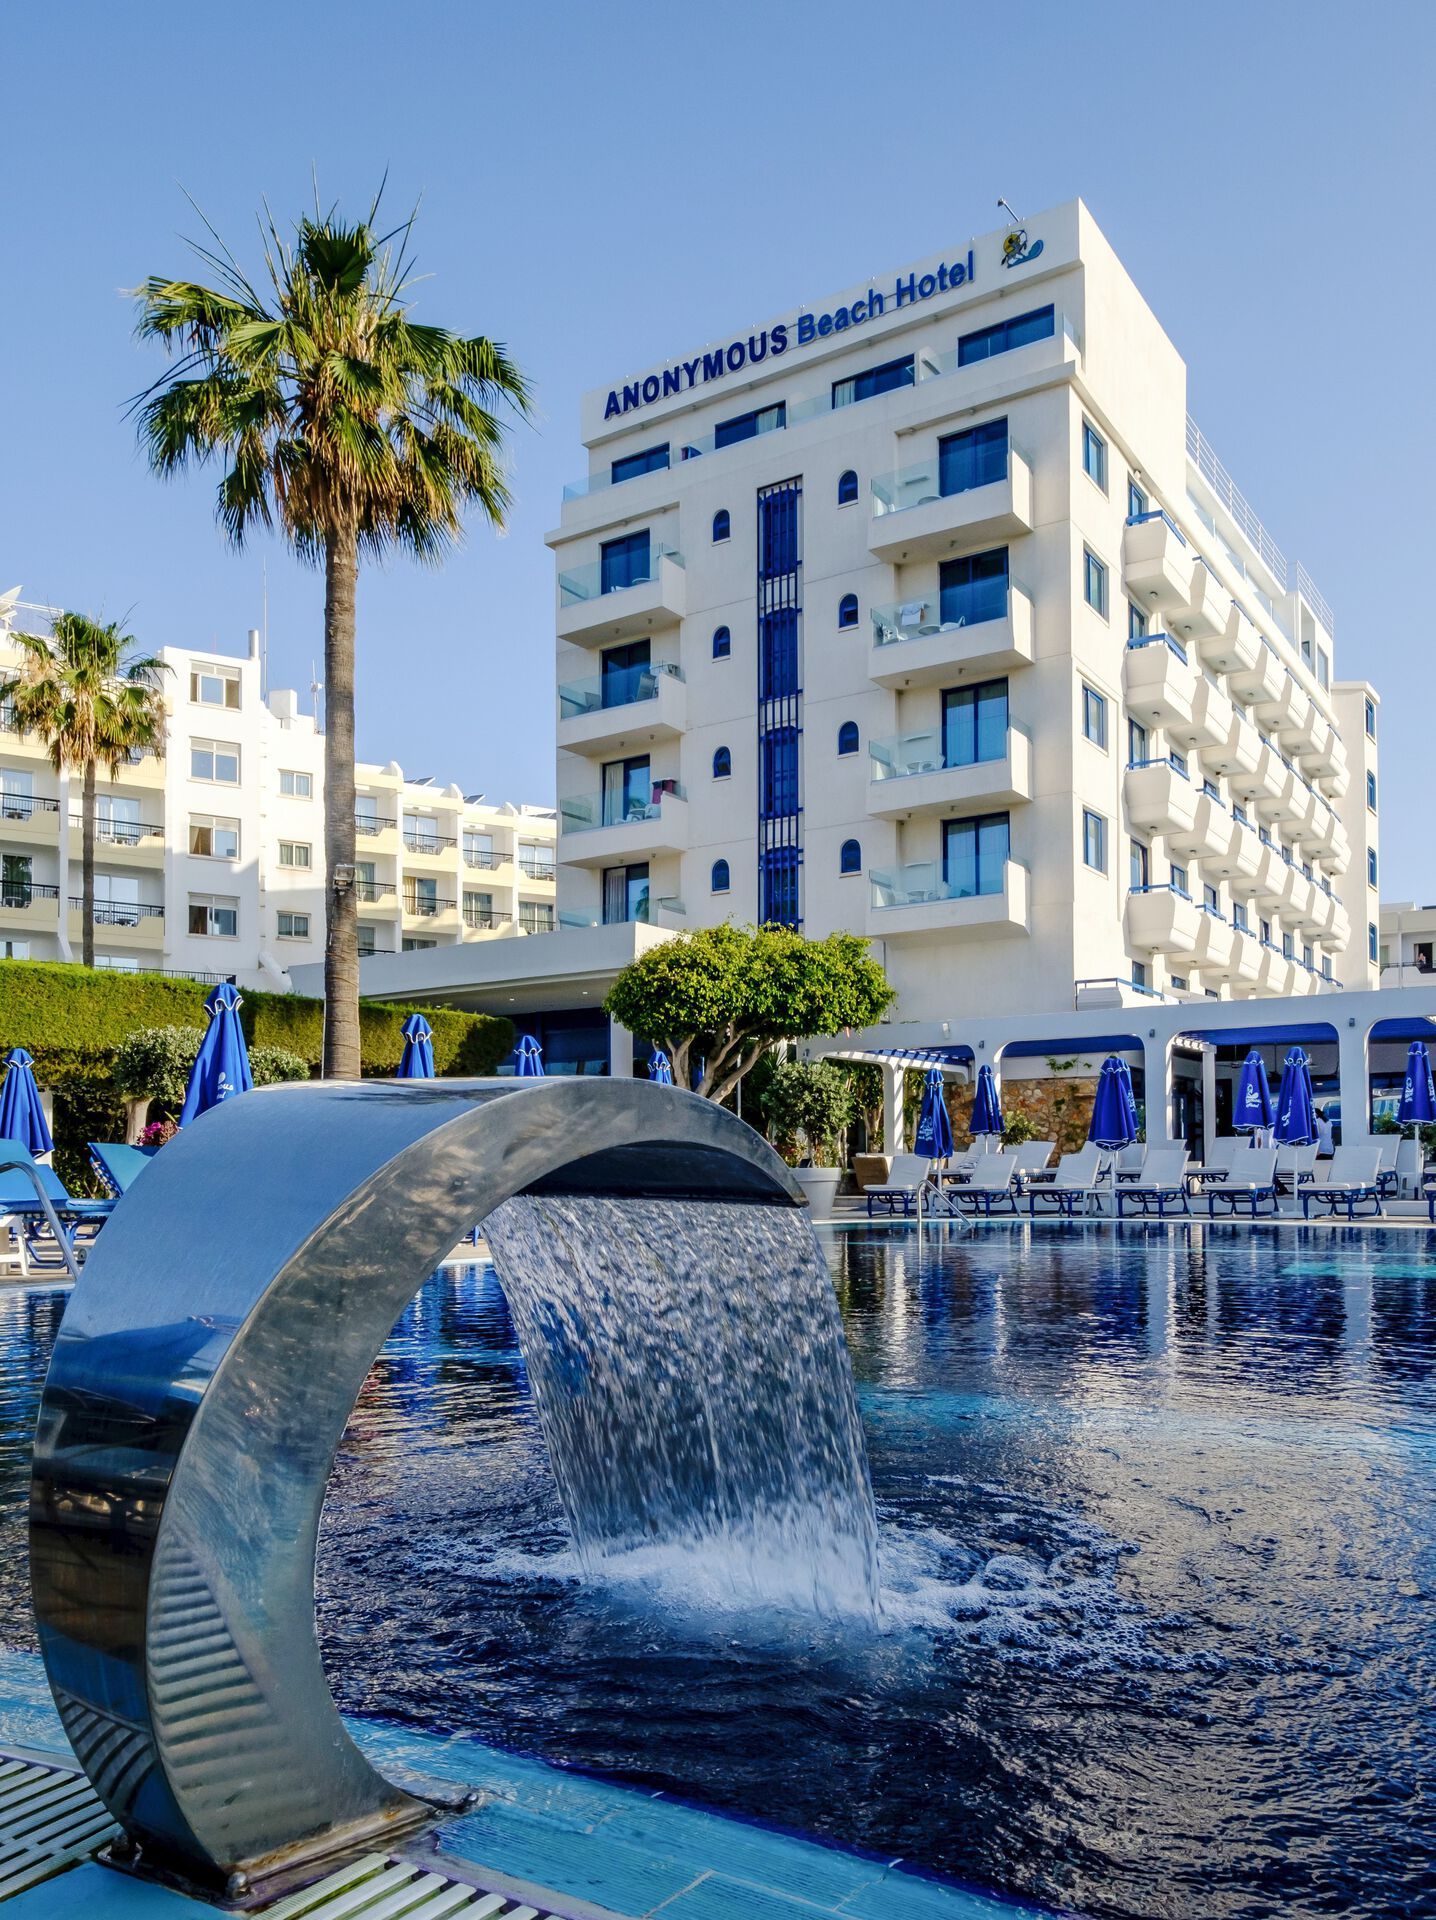 Chypre - Hotel Anonymous Beach 3*